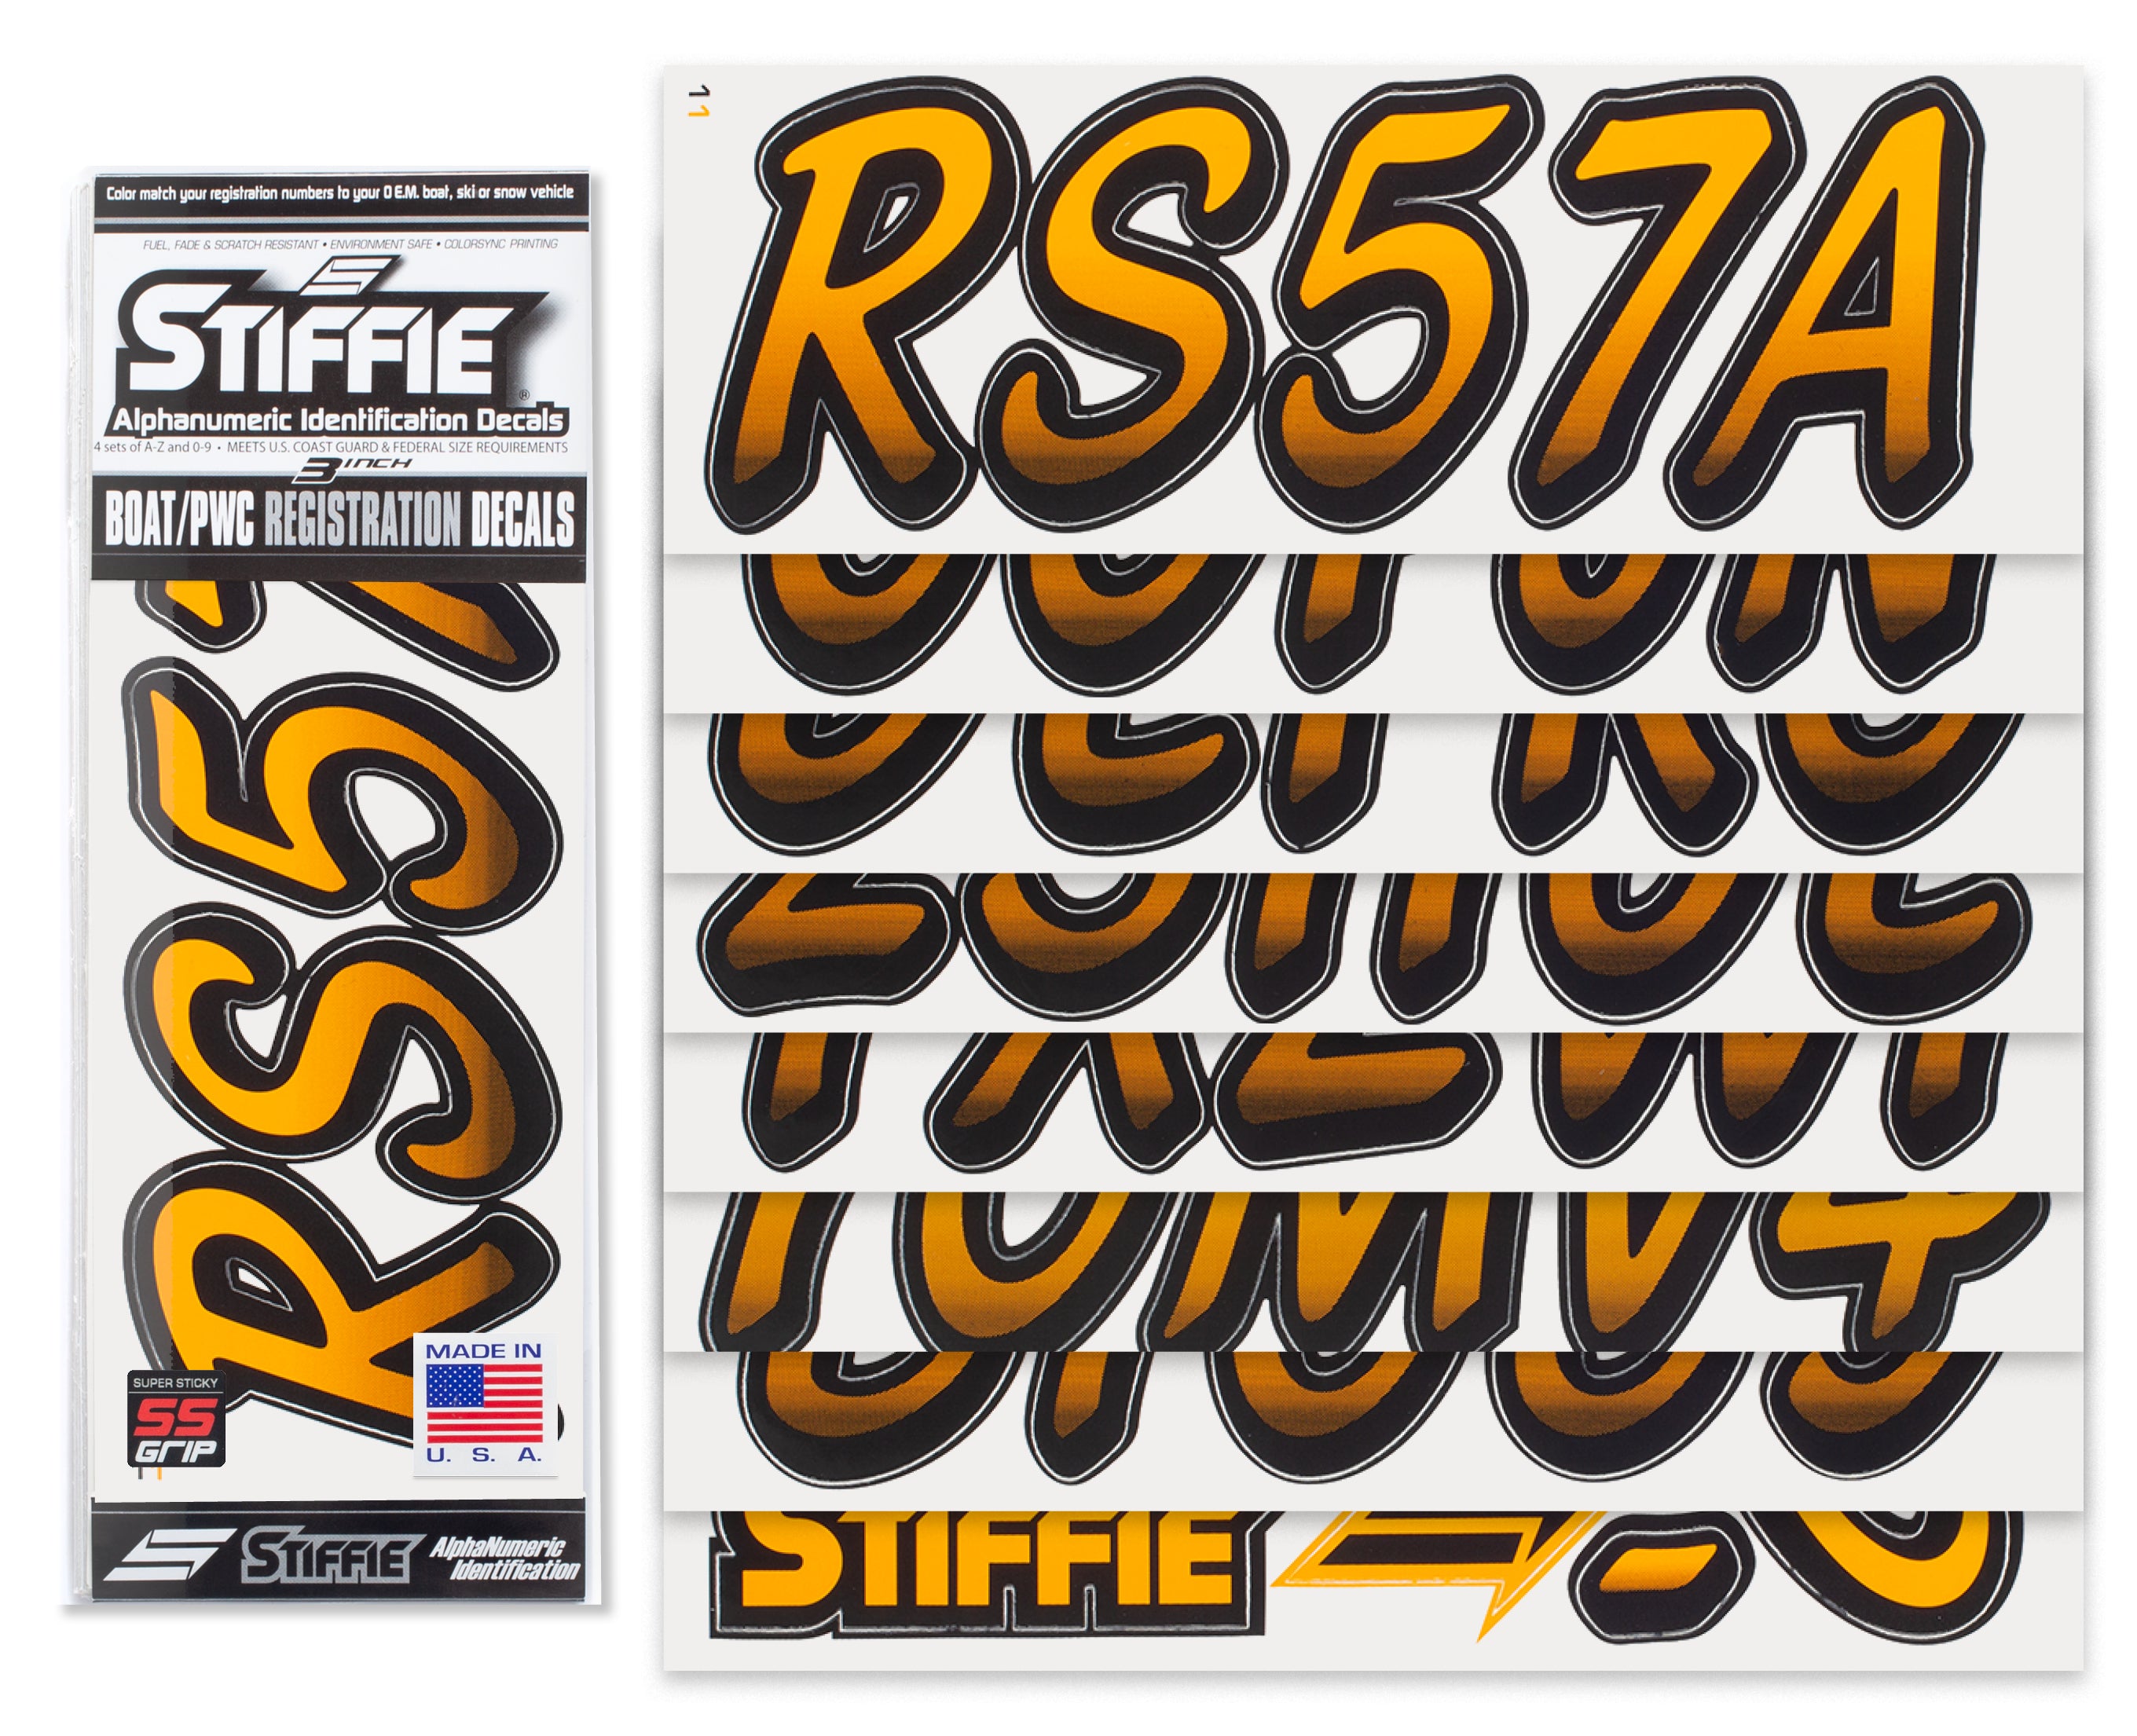 STIFFIE Whipline Orange Crush/Black Super Sticky 3" Alpha Numeric Registration Identification Numbers Stickers Decals for Sea-Doo Spark, Inflatable Boats, Ribs, Hypalon/PVC, PWC and Boats.